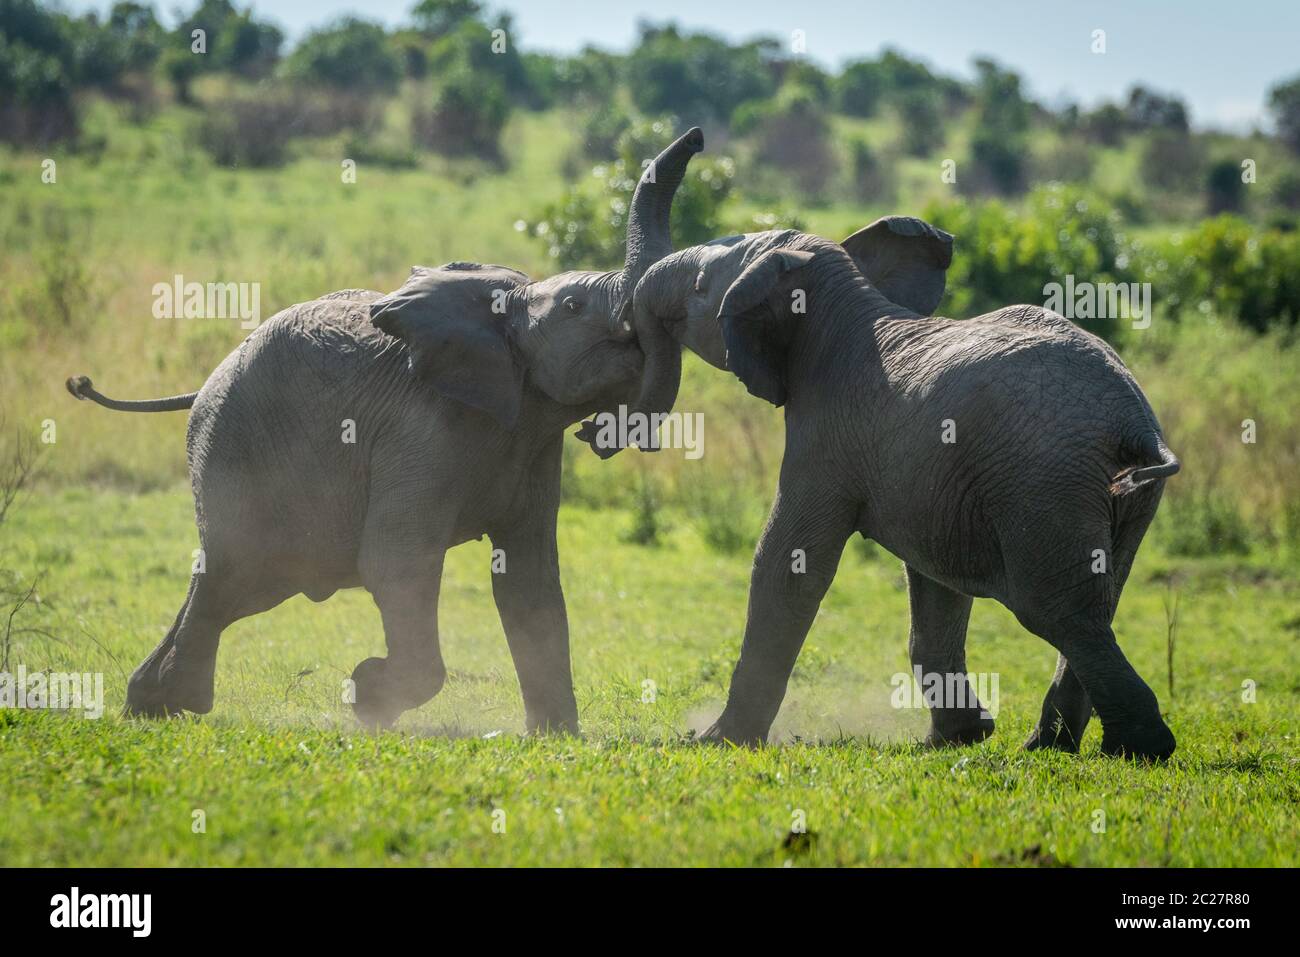 Two young elephants play fighting on grass Stock Photo